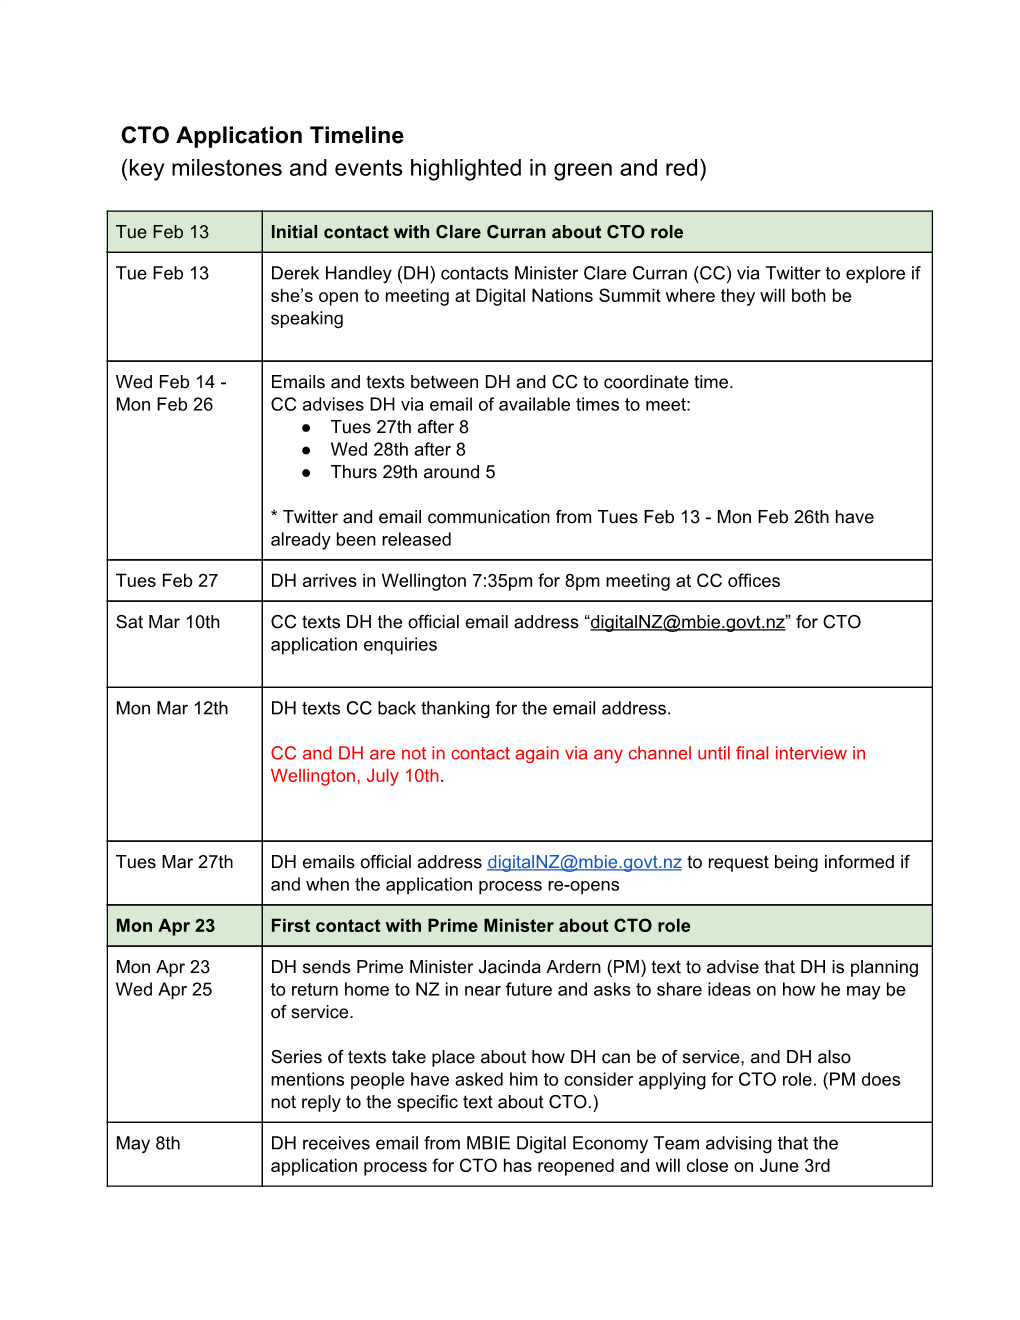 CTO Application Timeline (Key Milestones and Events Highlighted in Green and Red)